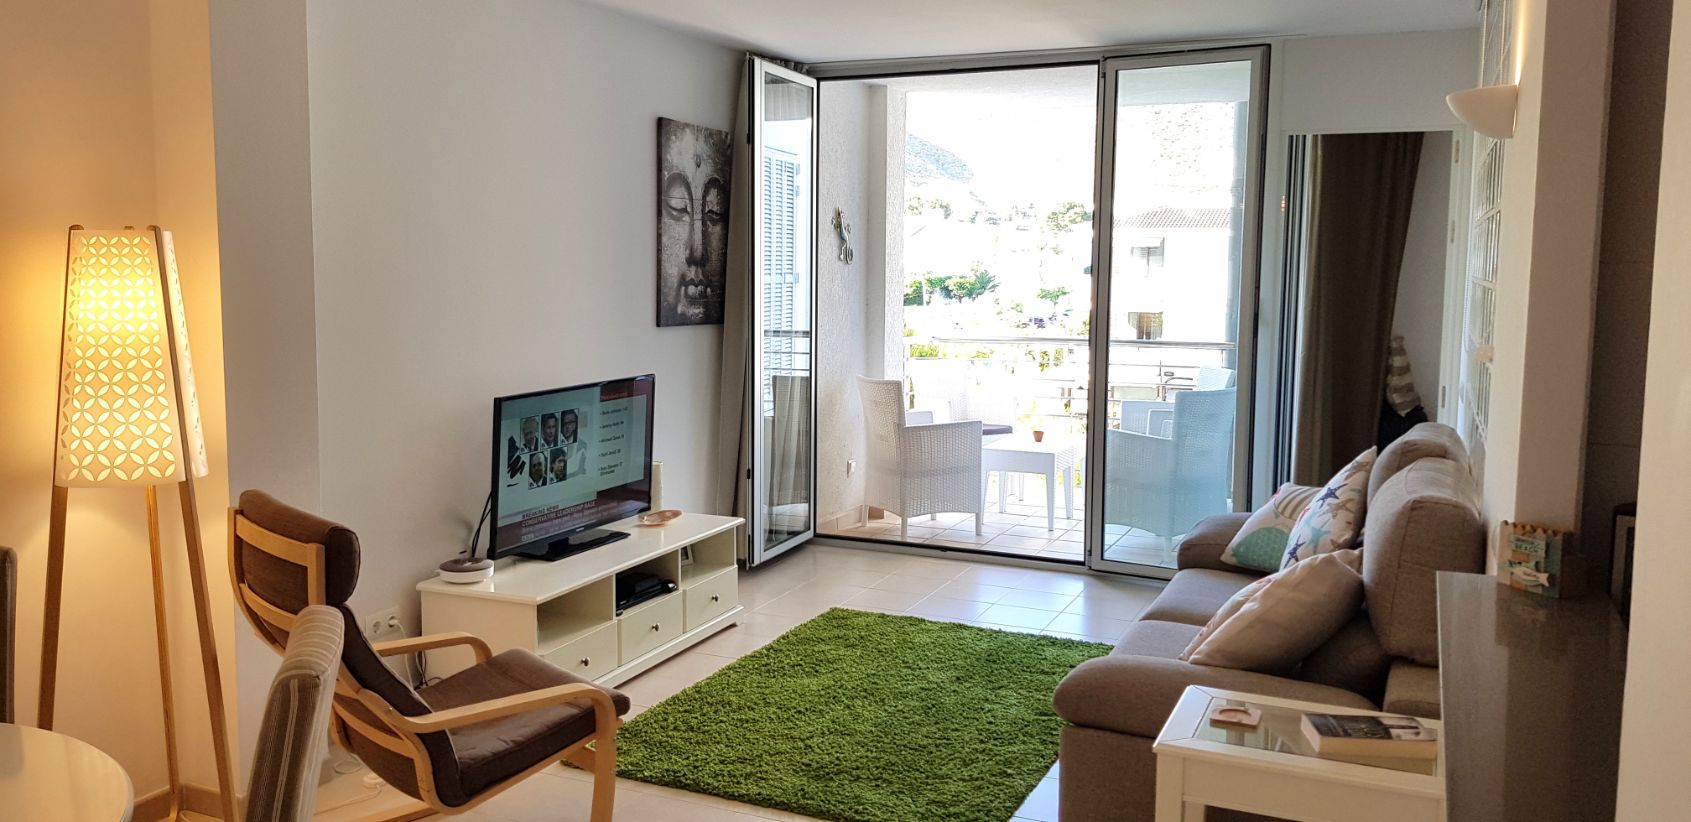 Beautifully presented 2 bedroom apartment with tourist license for sale in Puerto Pollensa